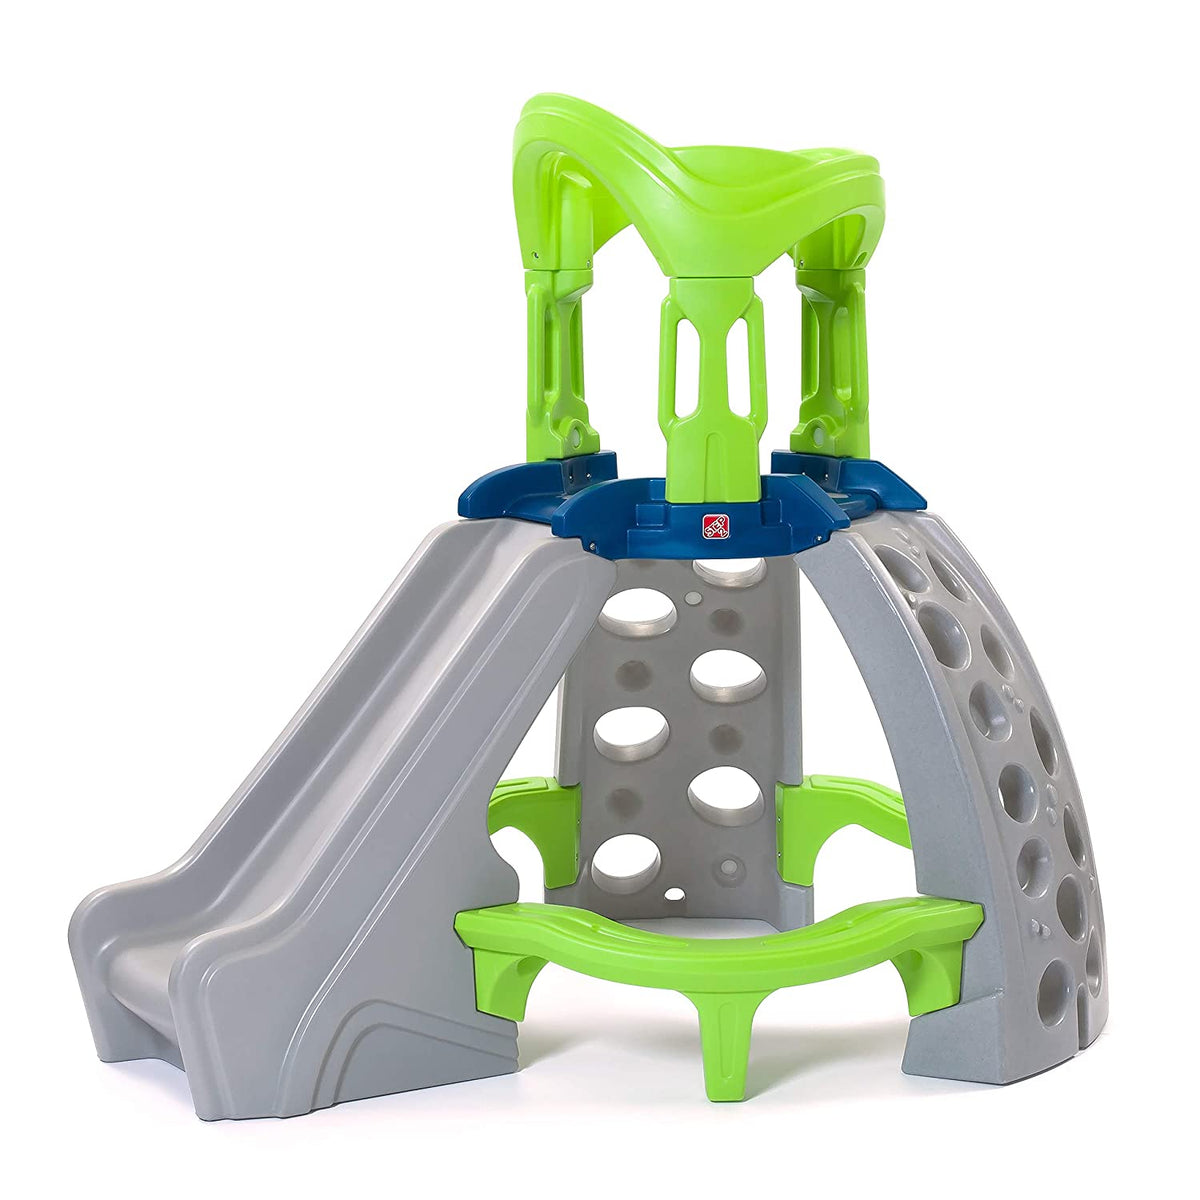 Step2 Castle Top Mountain Climber Outdoor Play Toy for Kids